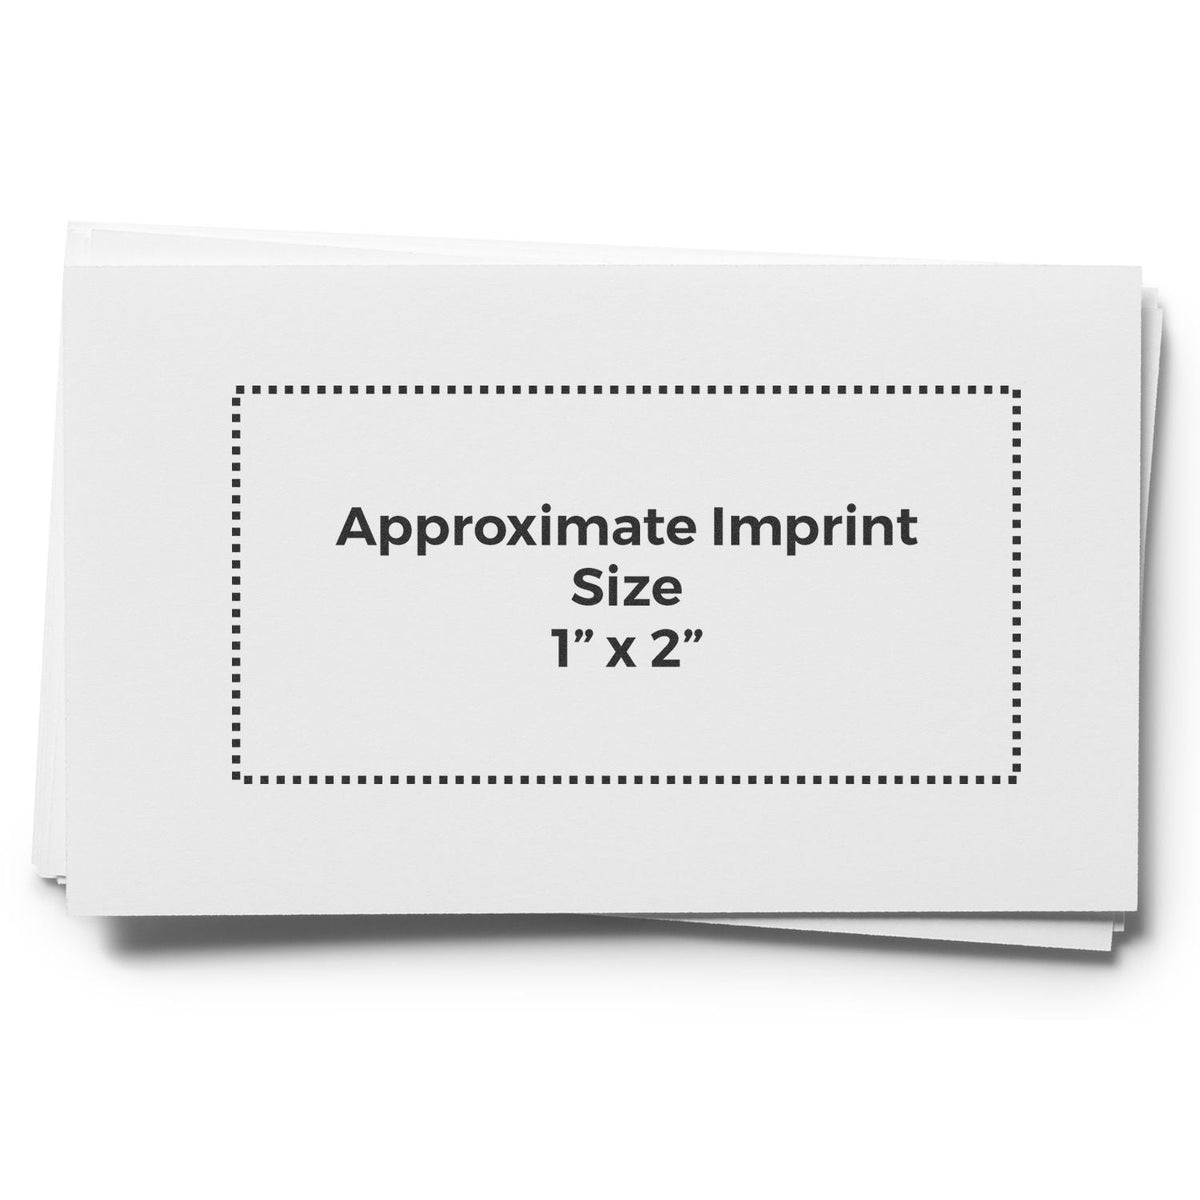 regular rubber stamp size 1 x 2 size dimensions overlay